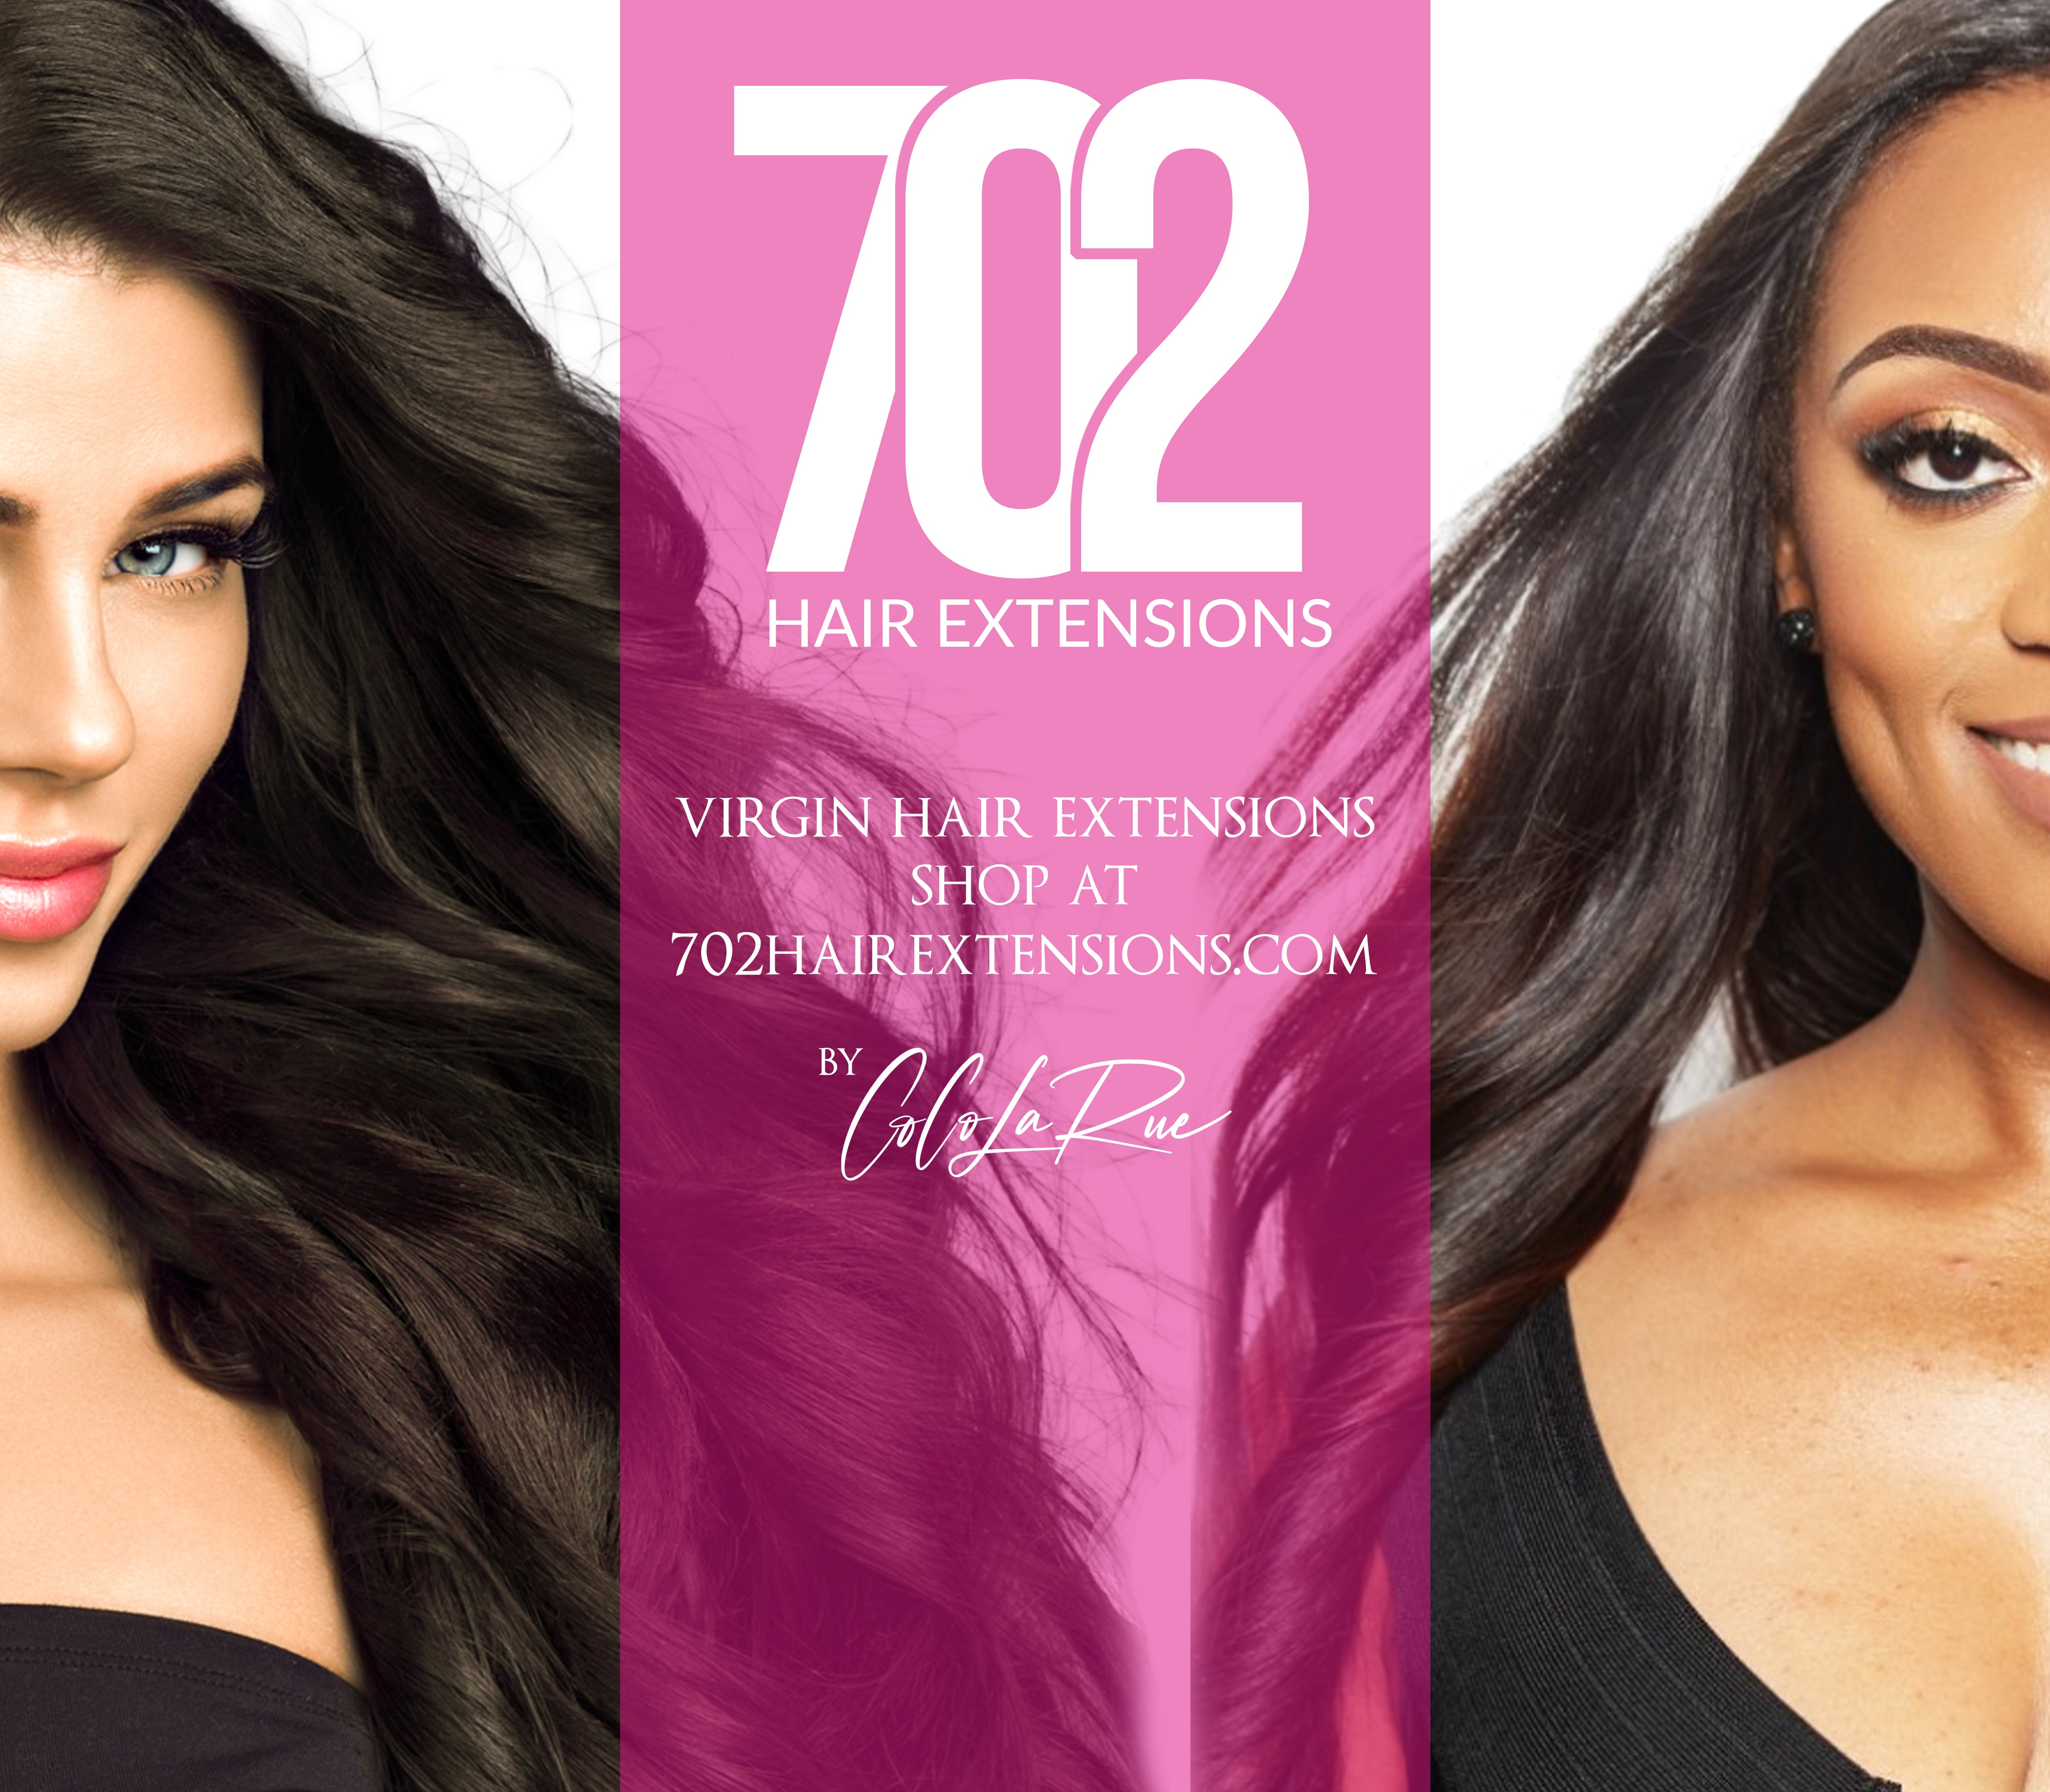 Bring a difference to your hair game at DMV Hair Extensions